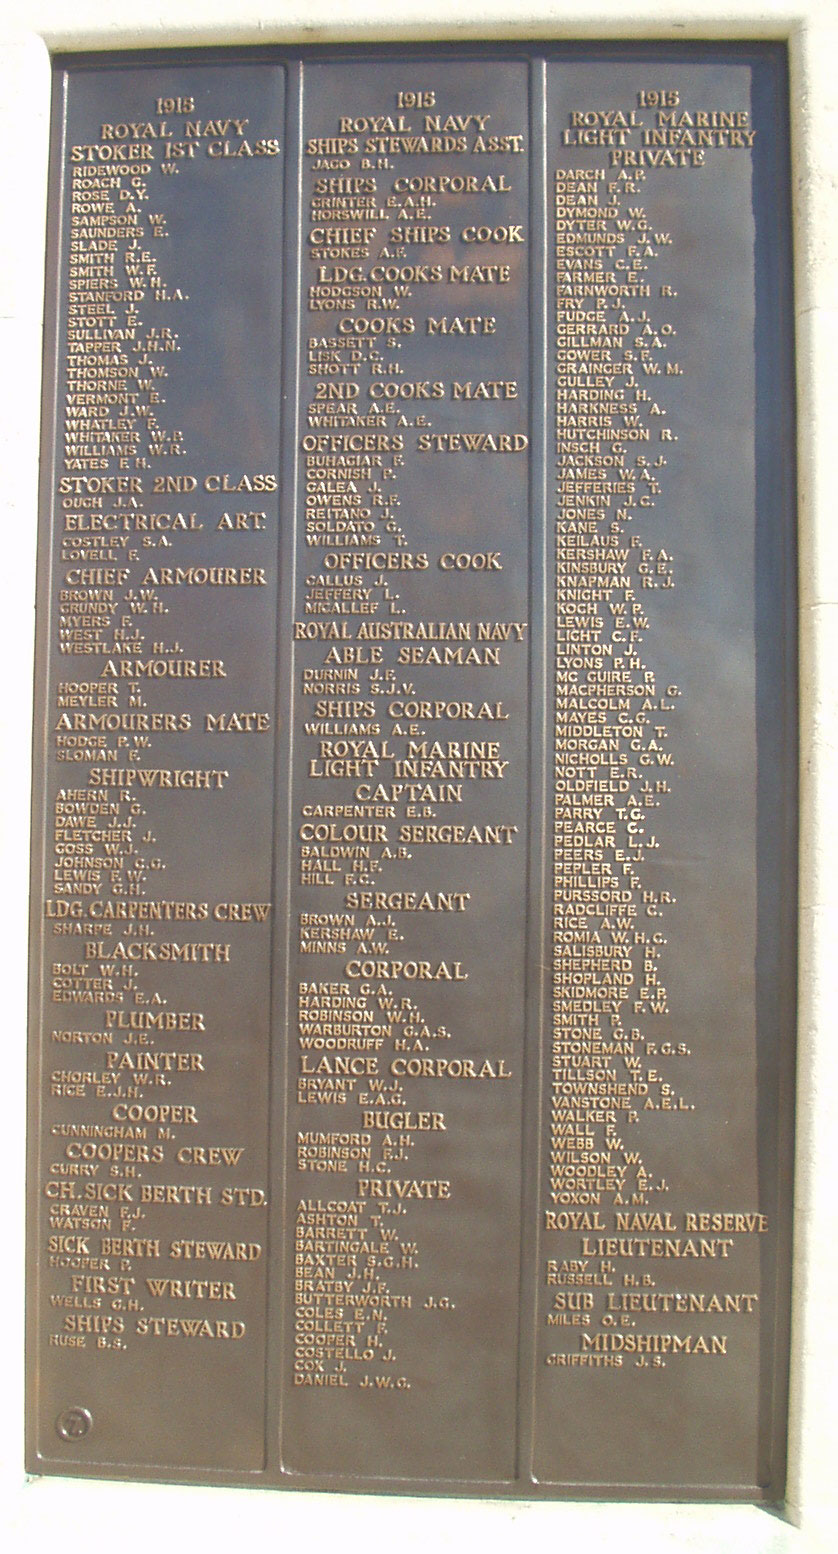 Panel 7 of the Plymouth Naval Memorial.